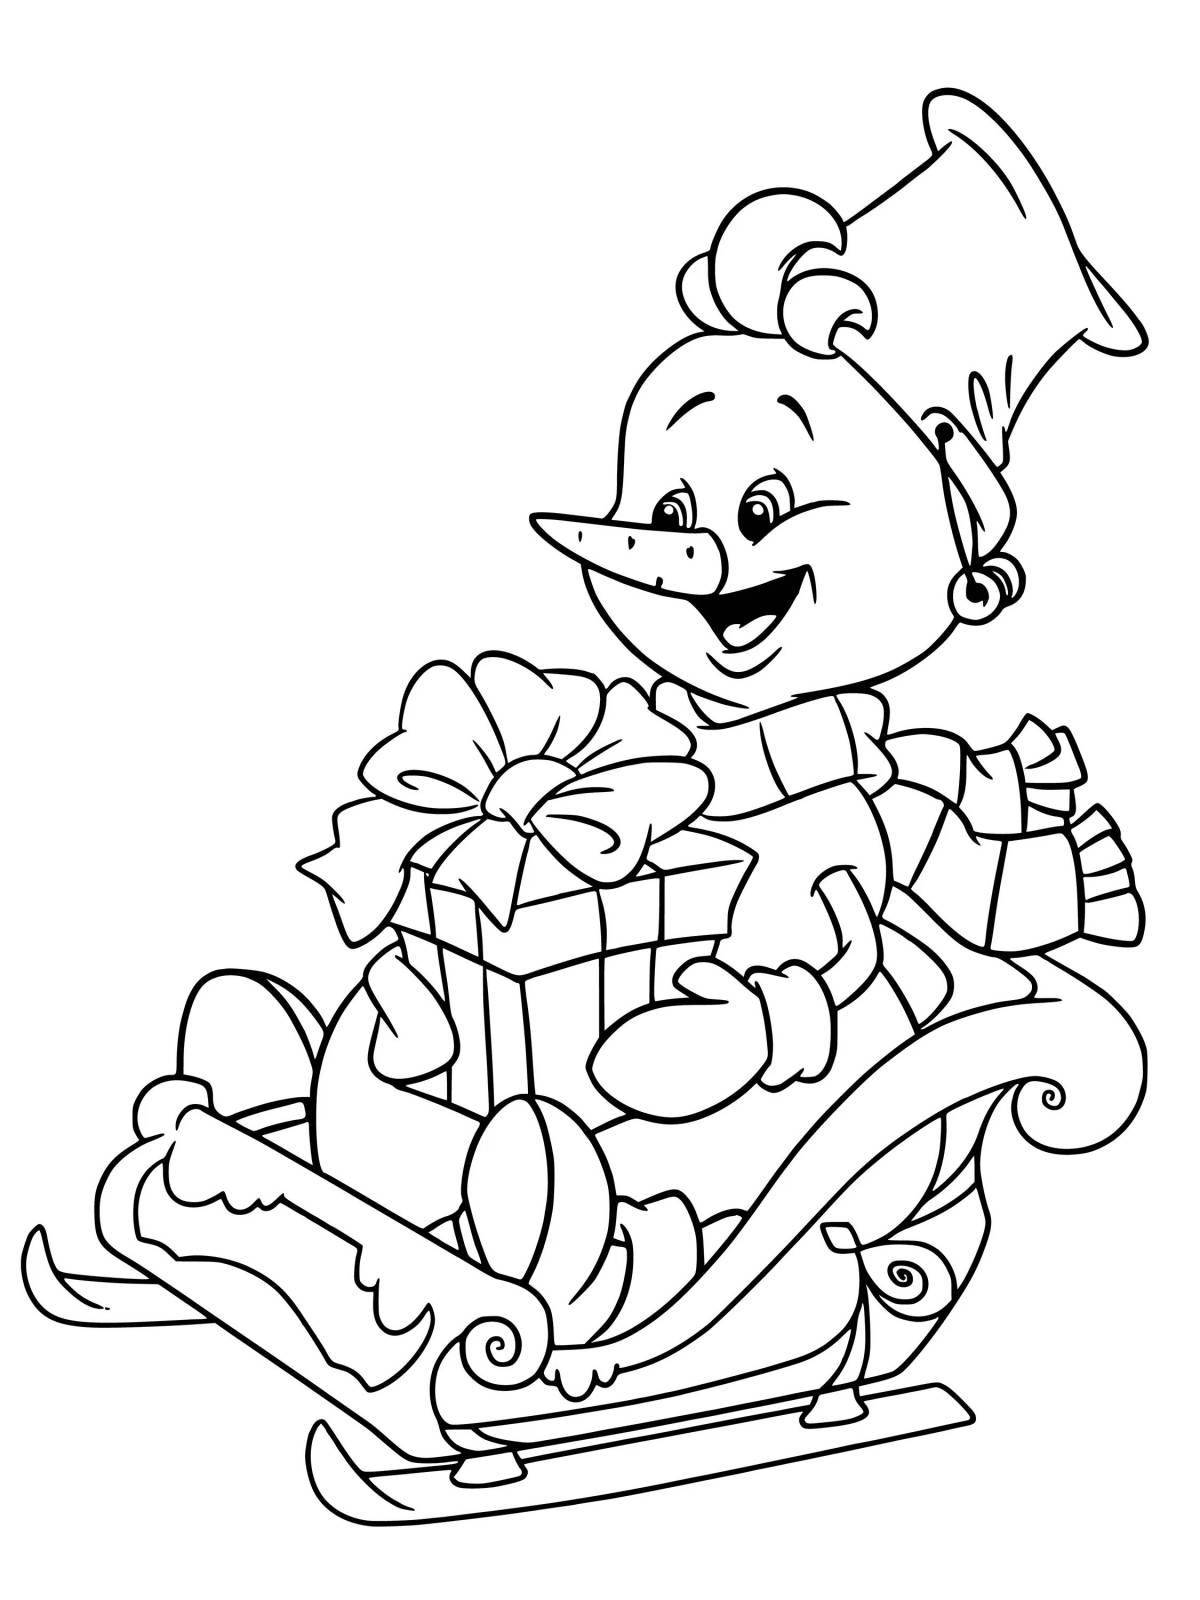 Coloring book exciting birthday snowman